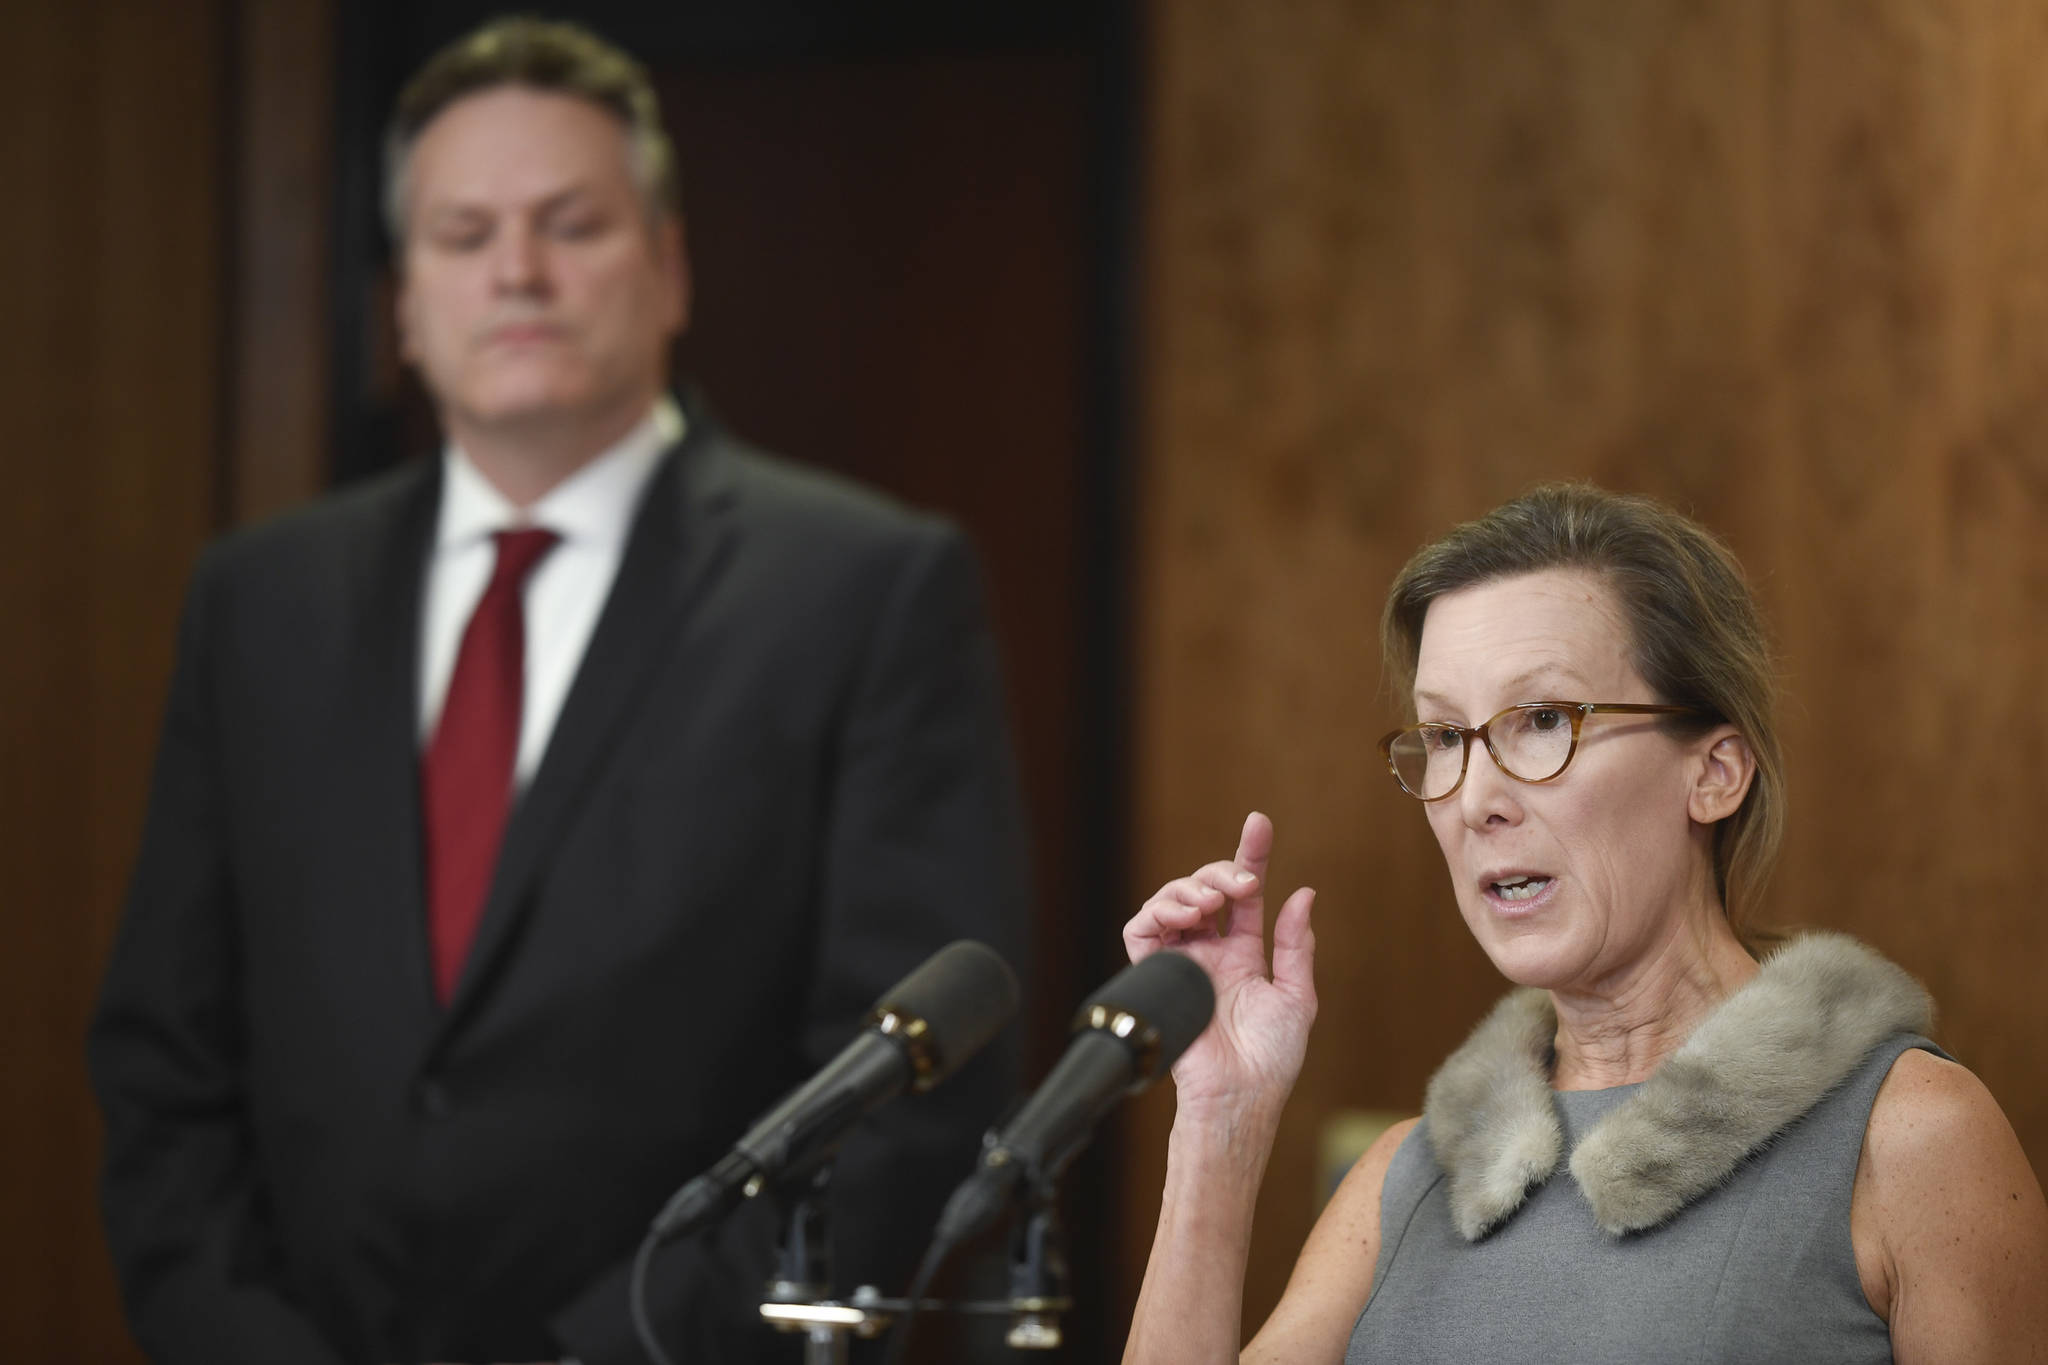 In this Feb. 13, 2019 photo, Office of Management and Budget Director Donna Arduin explains the budget as Gov. Mike Dunleavy listens during a press conference. (Michael Penn | Juneau Empire File)